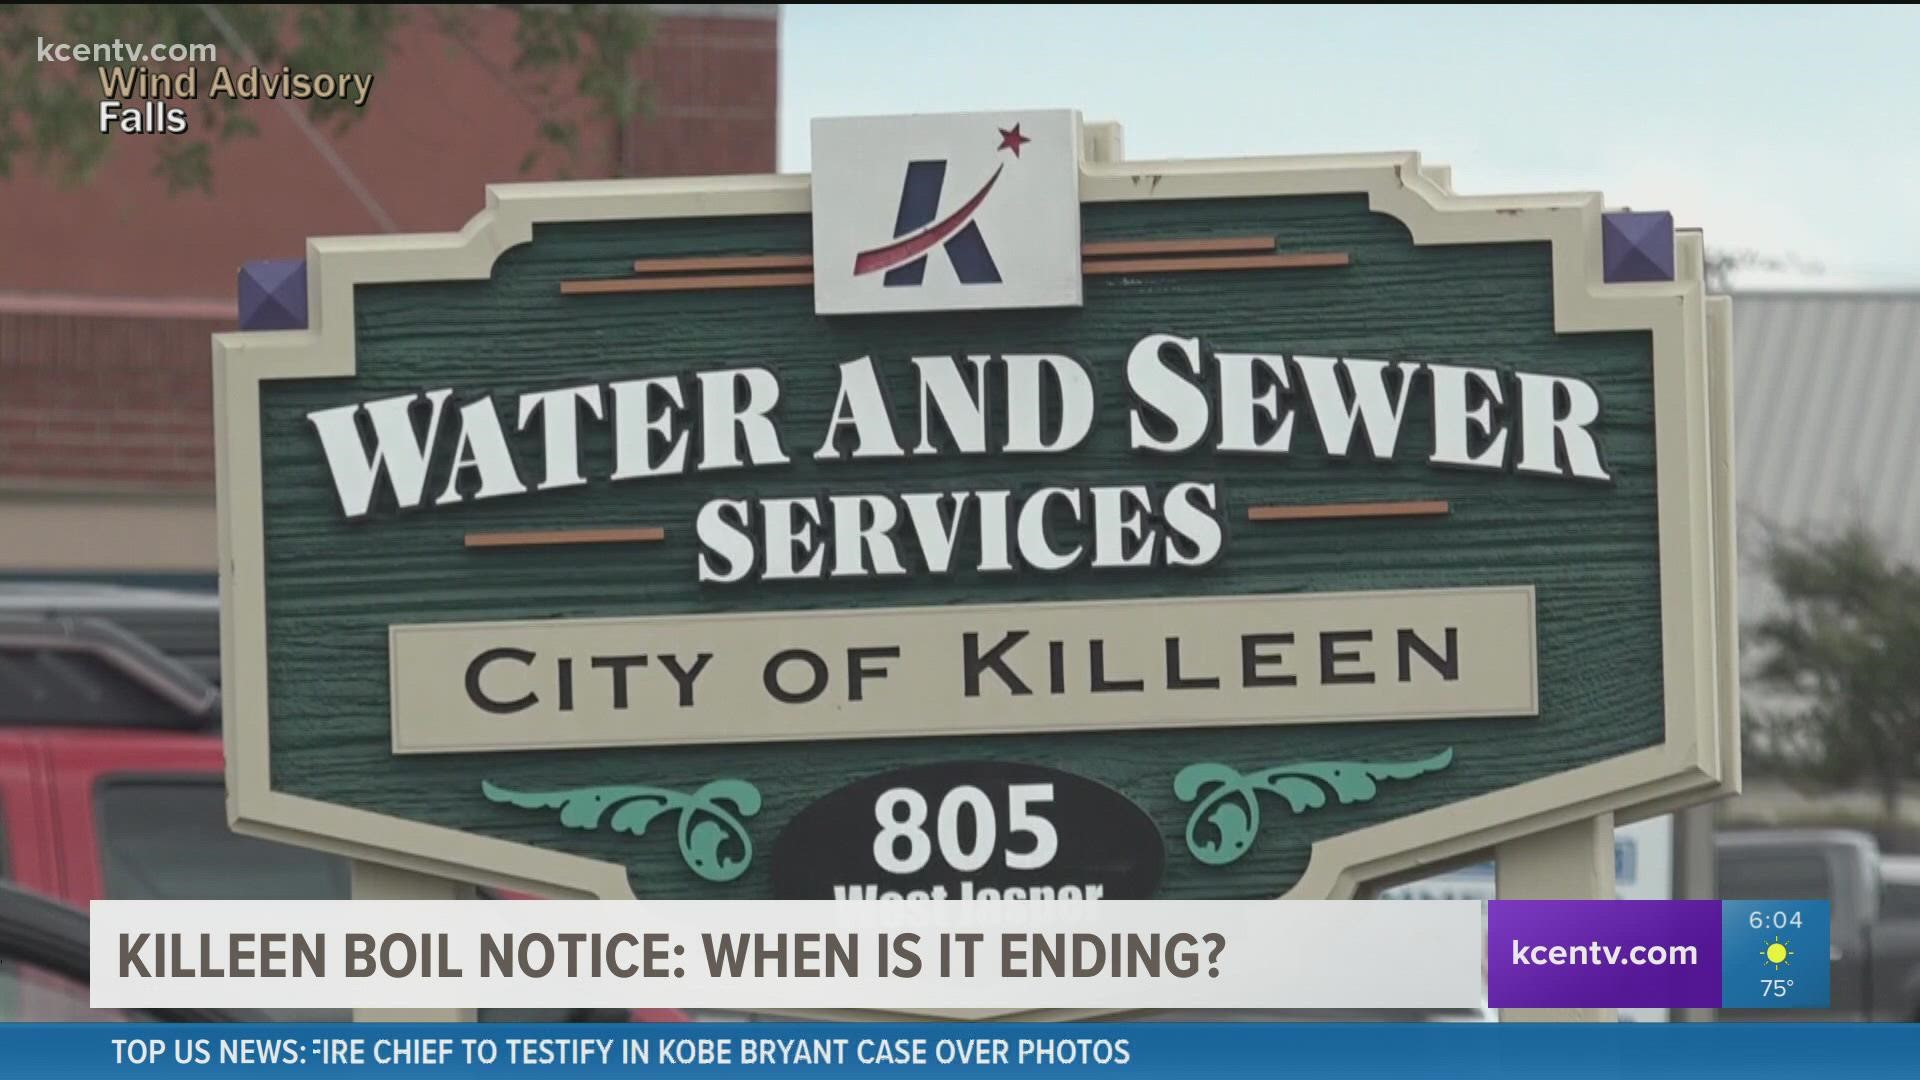 During Tuesday night's City Council meeting, leaders said they were hopeful parts of Killeen will see the notice lifted Wednesday night.